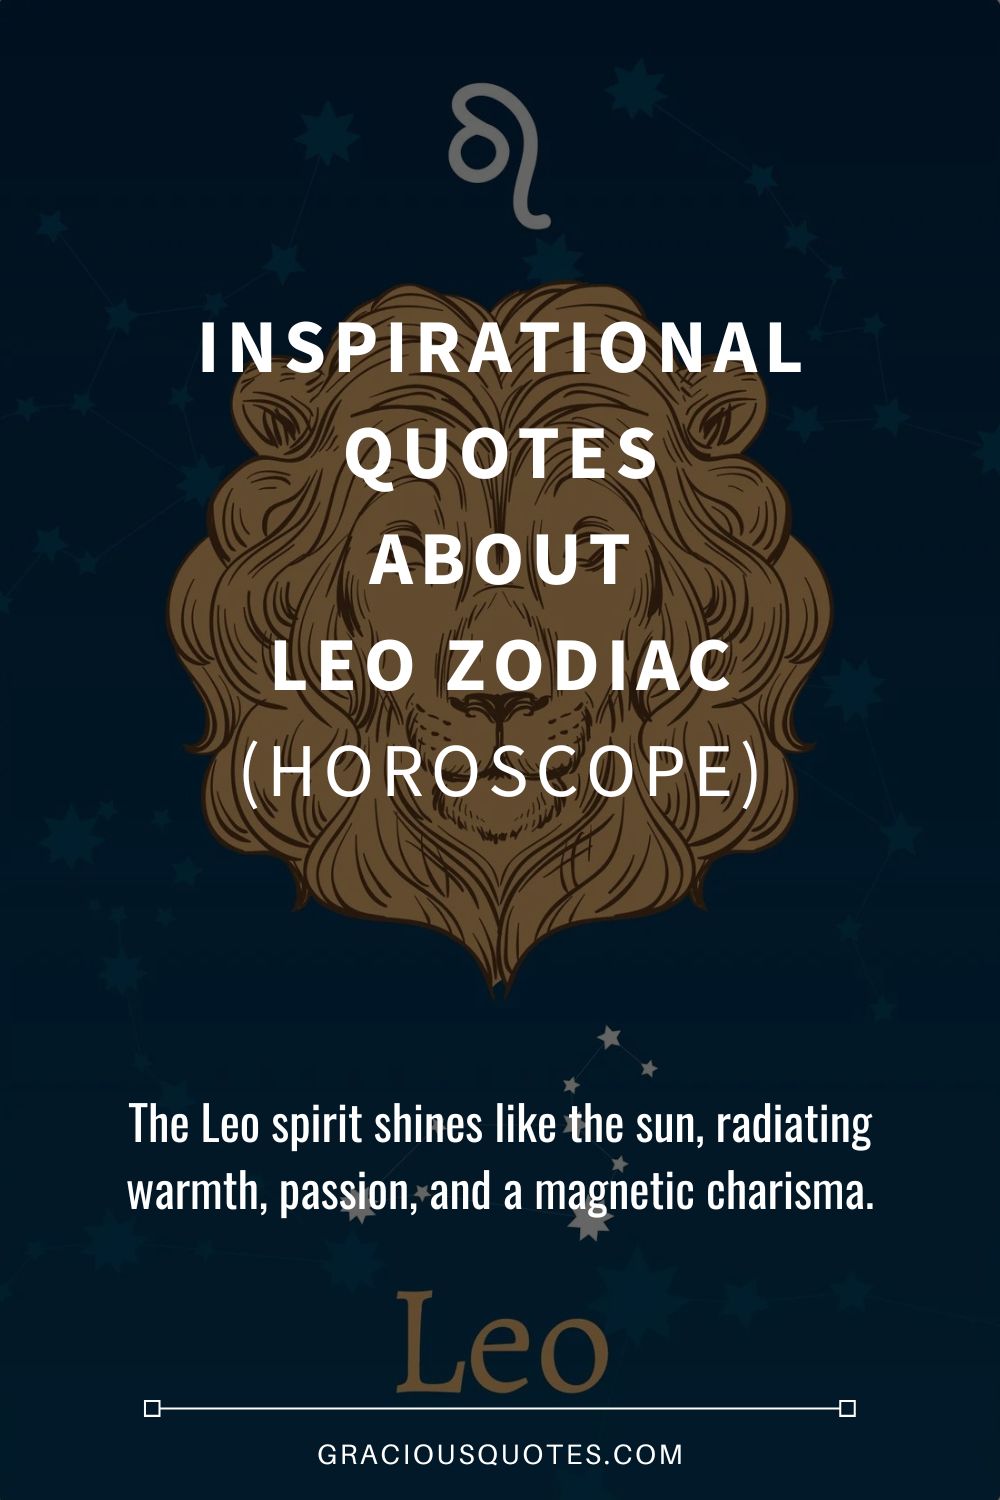 Inspirational Quotes About Leo Zodiac (HOROSCOPE) - Gracious Quotes